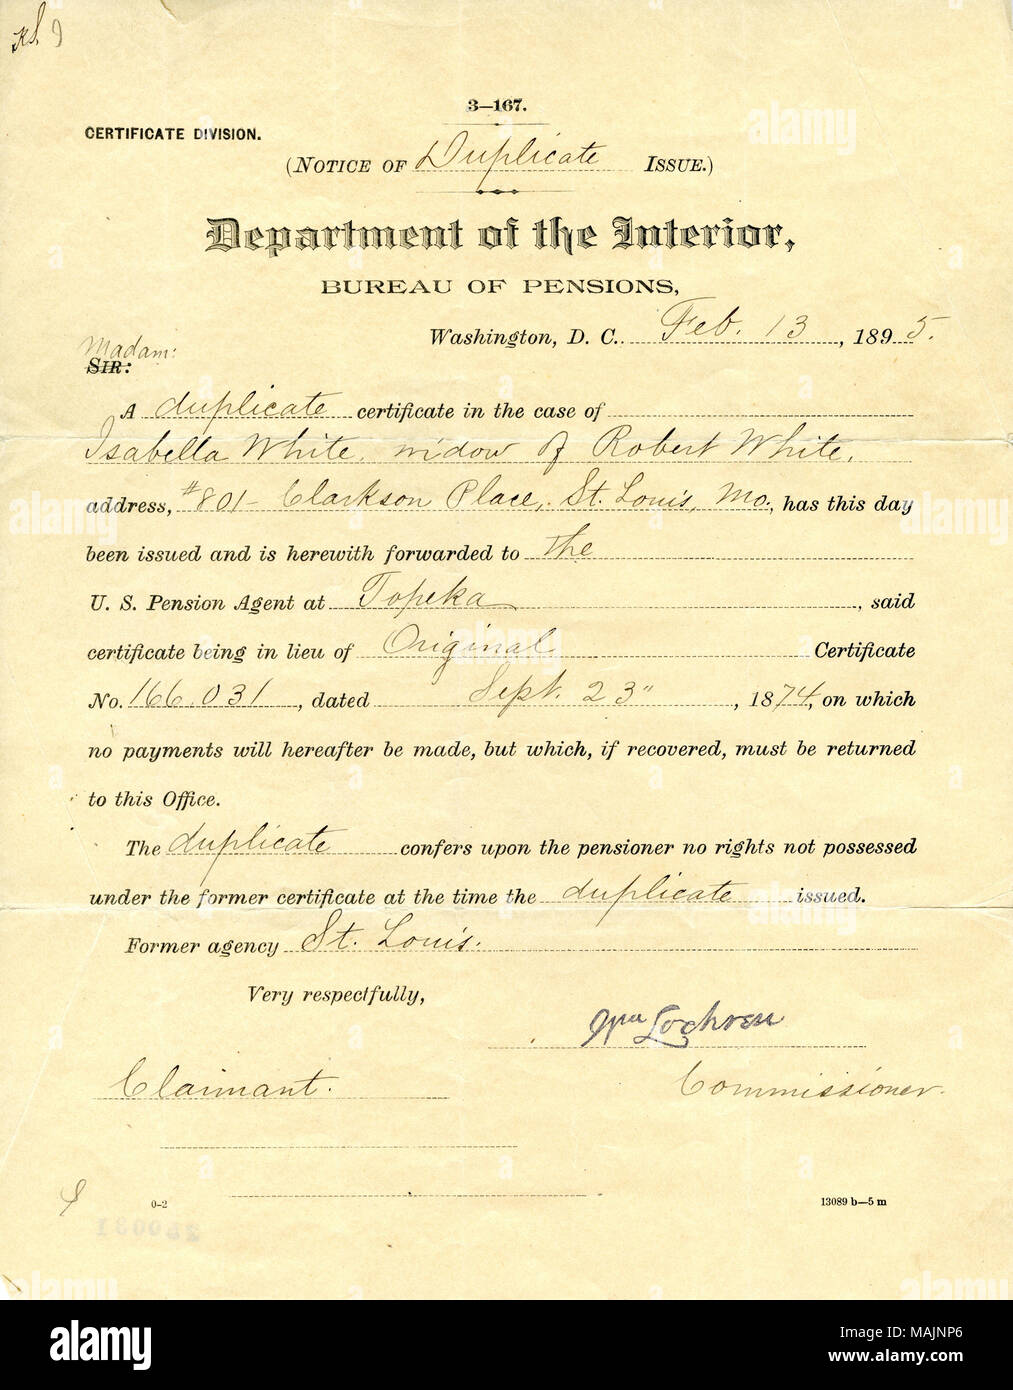 States that a duplicate pension certificate in the case of Isabella White, widow of Robert White, was issued and forwarded to the U.S. Pension Agent at Topeka. Title: Circular letter of William Lochren, Commissioner, Department of the Interior, Bureau of Pensions, Washington, D.C., to Claimant [Isabella White], February 13, 1895  . 13 February 1895. Lochren, William Stock Photo